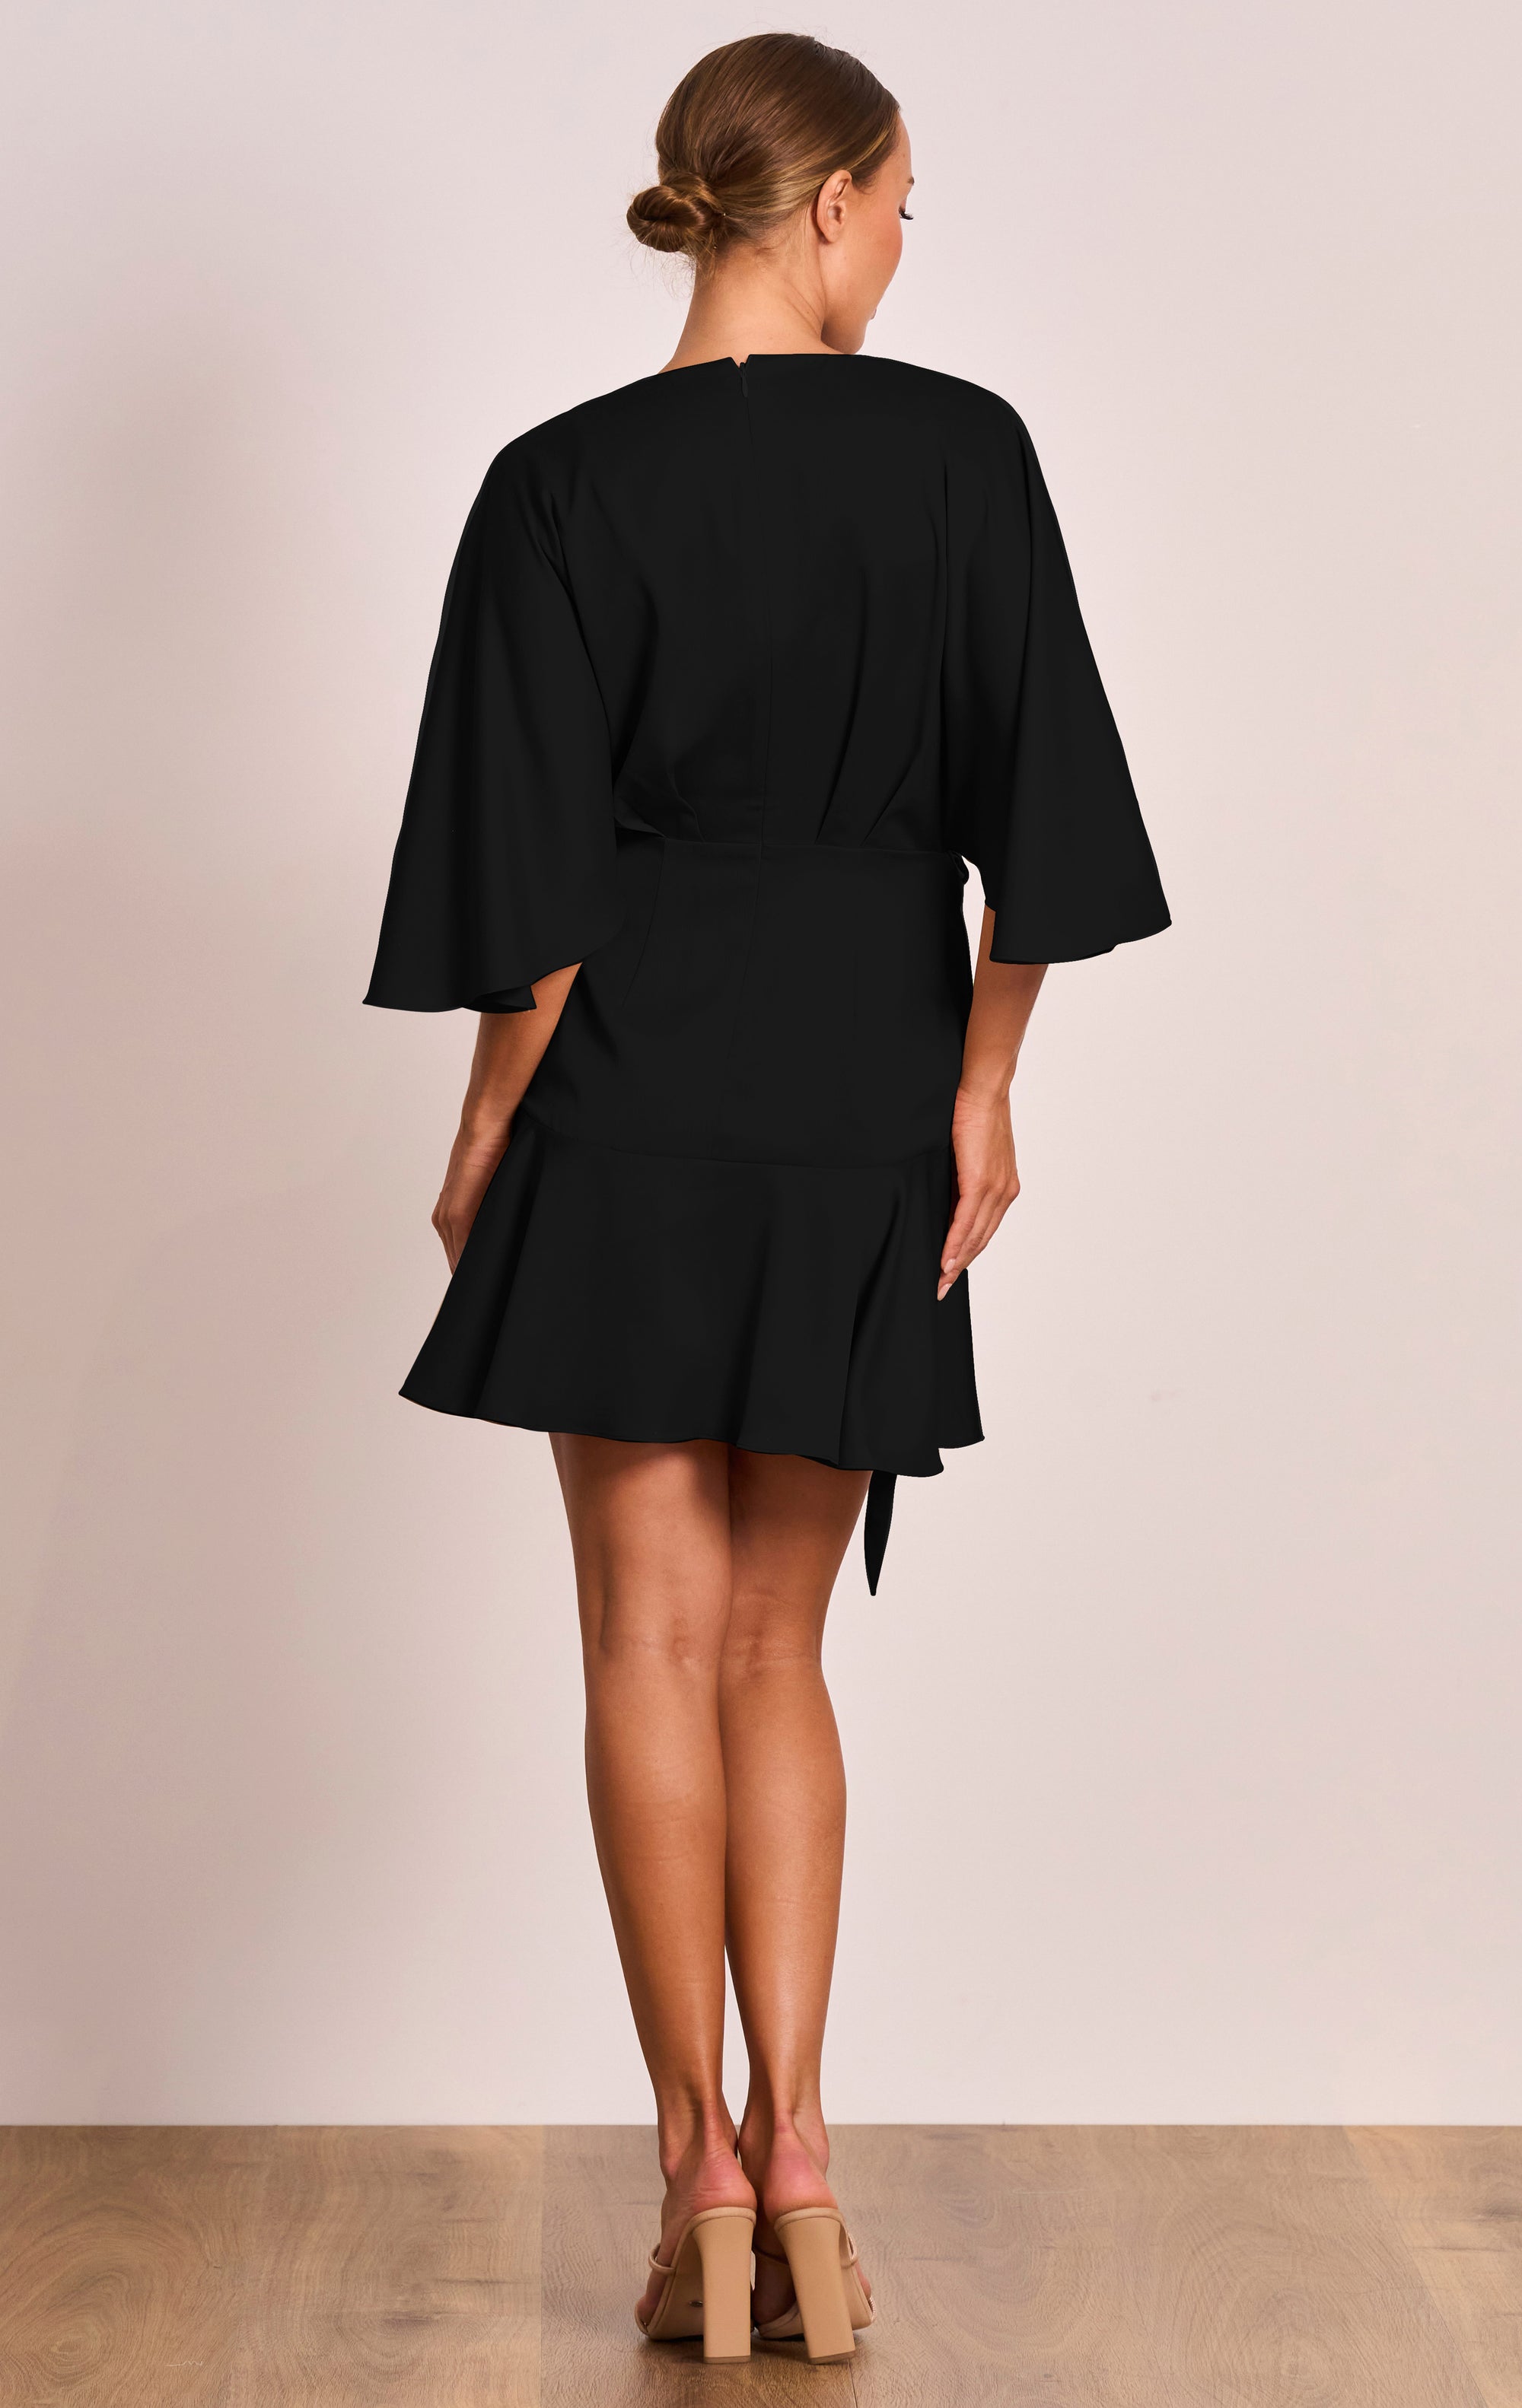 Lucia Wrap Mini Dress - TAKE 40% OFF DISCOUNT APPLIED AT CHECKOUT